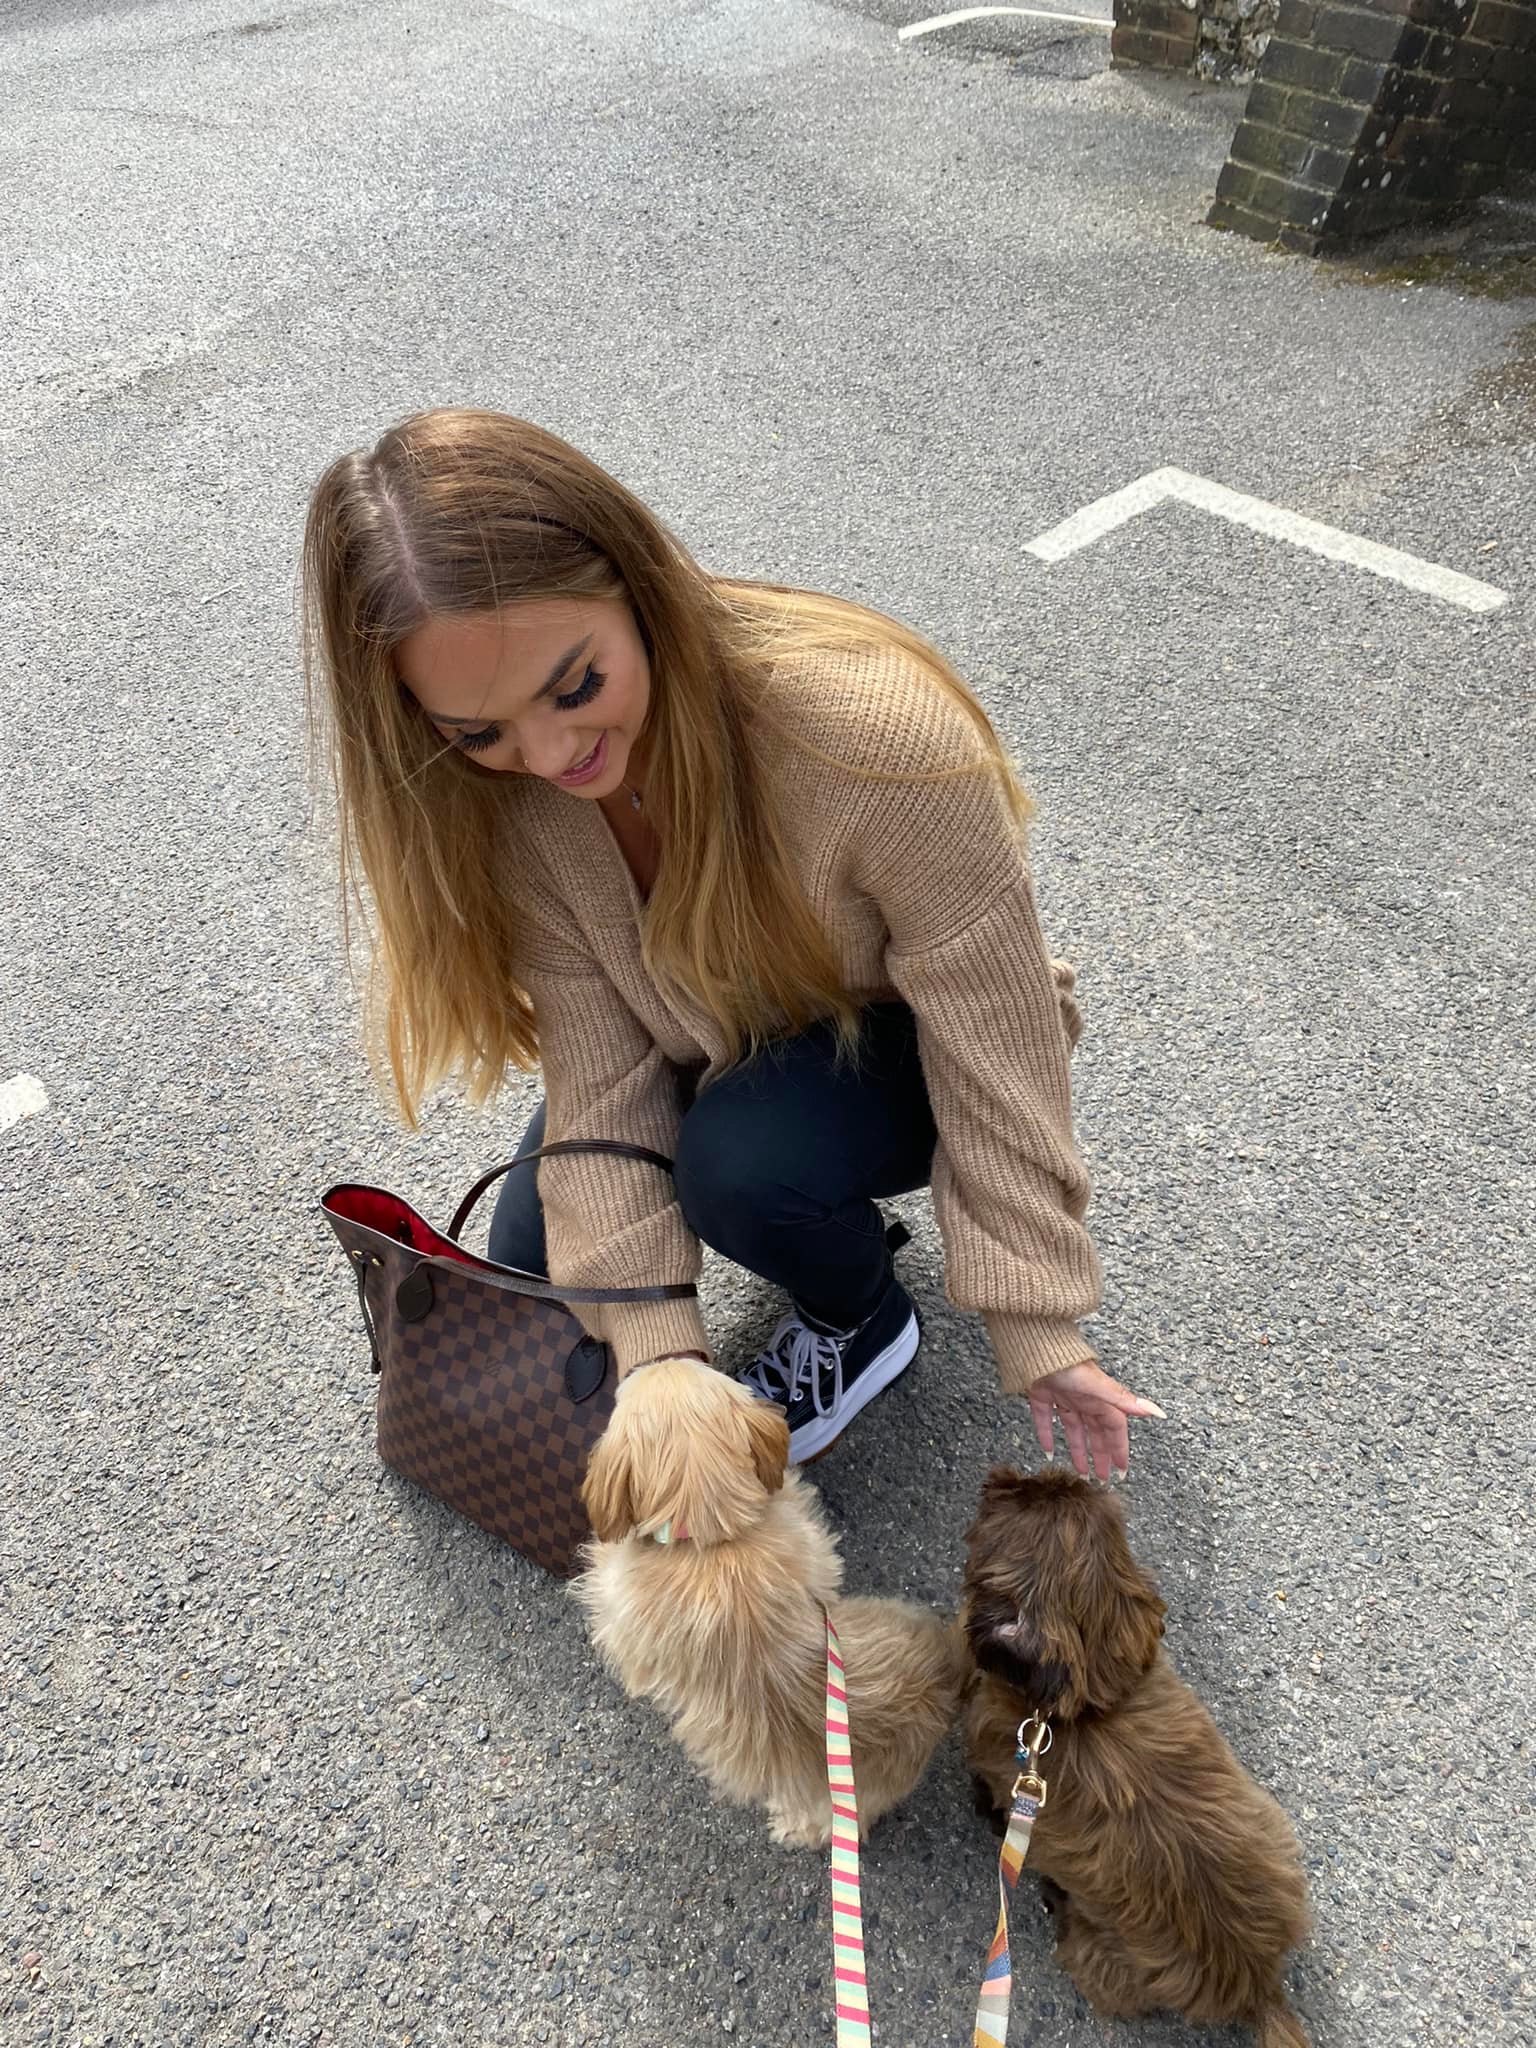 Emily with Katy's two dogs